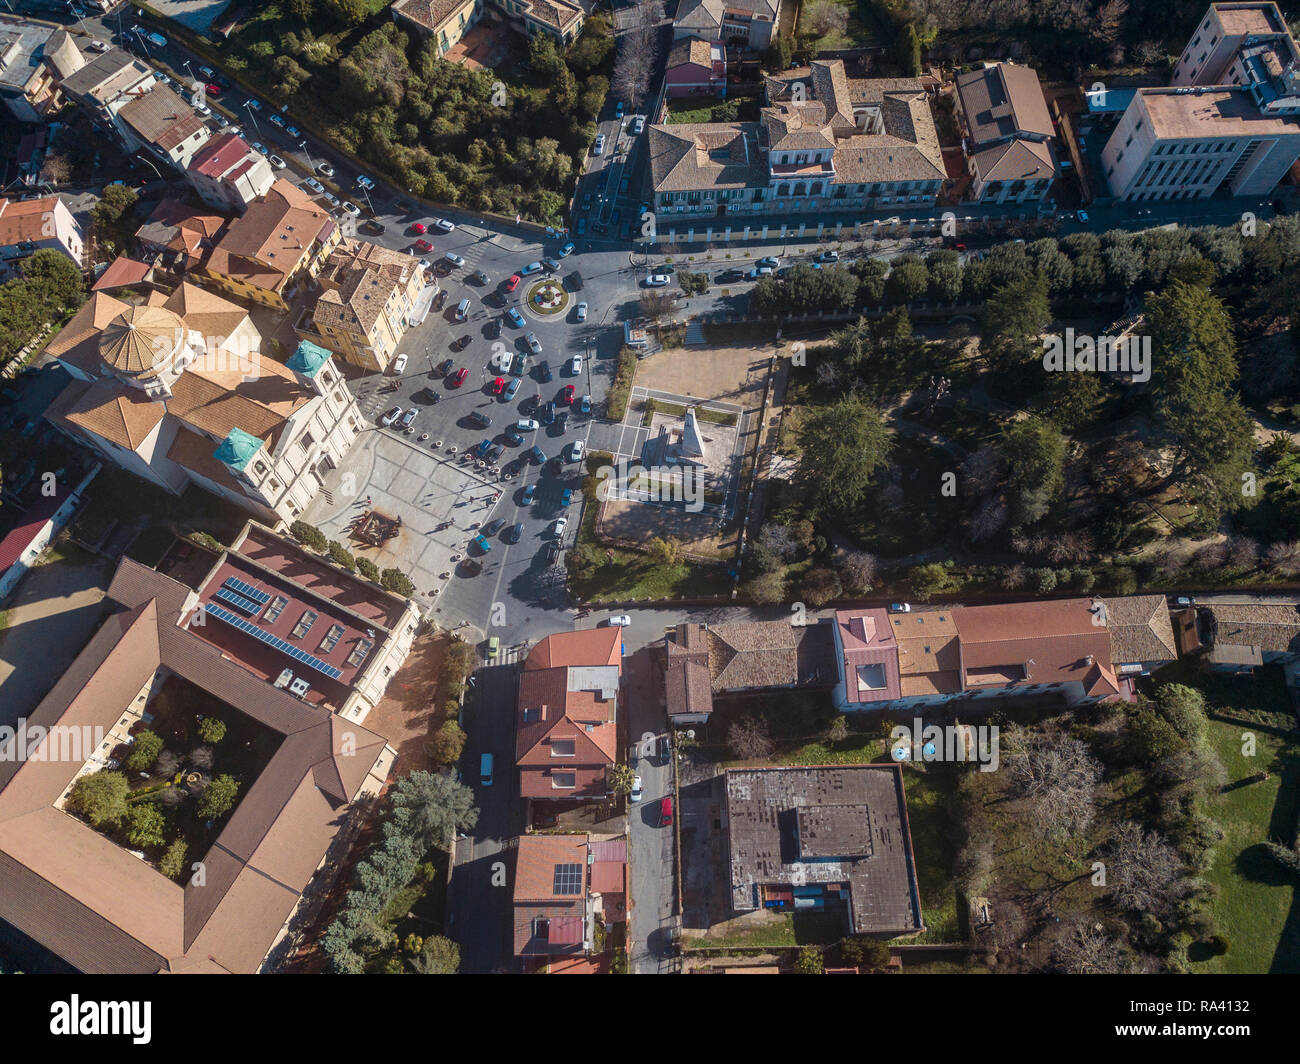 Aerial view of the Cathedral square of Santa Maria Maggiore, San Leoluca, municipal park, houses and roofs, urban area, Vibo Valentia, Calabria, Italy Stock Photo